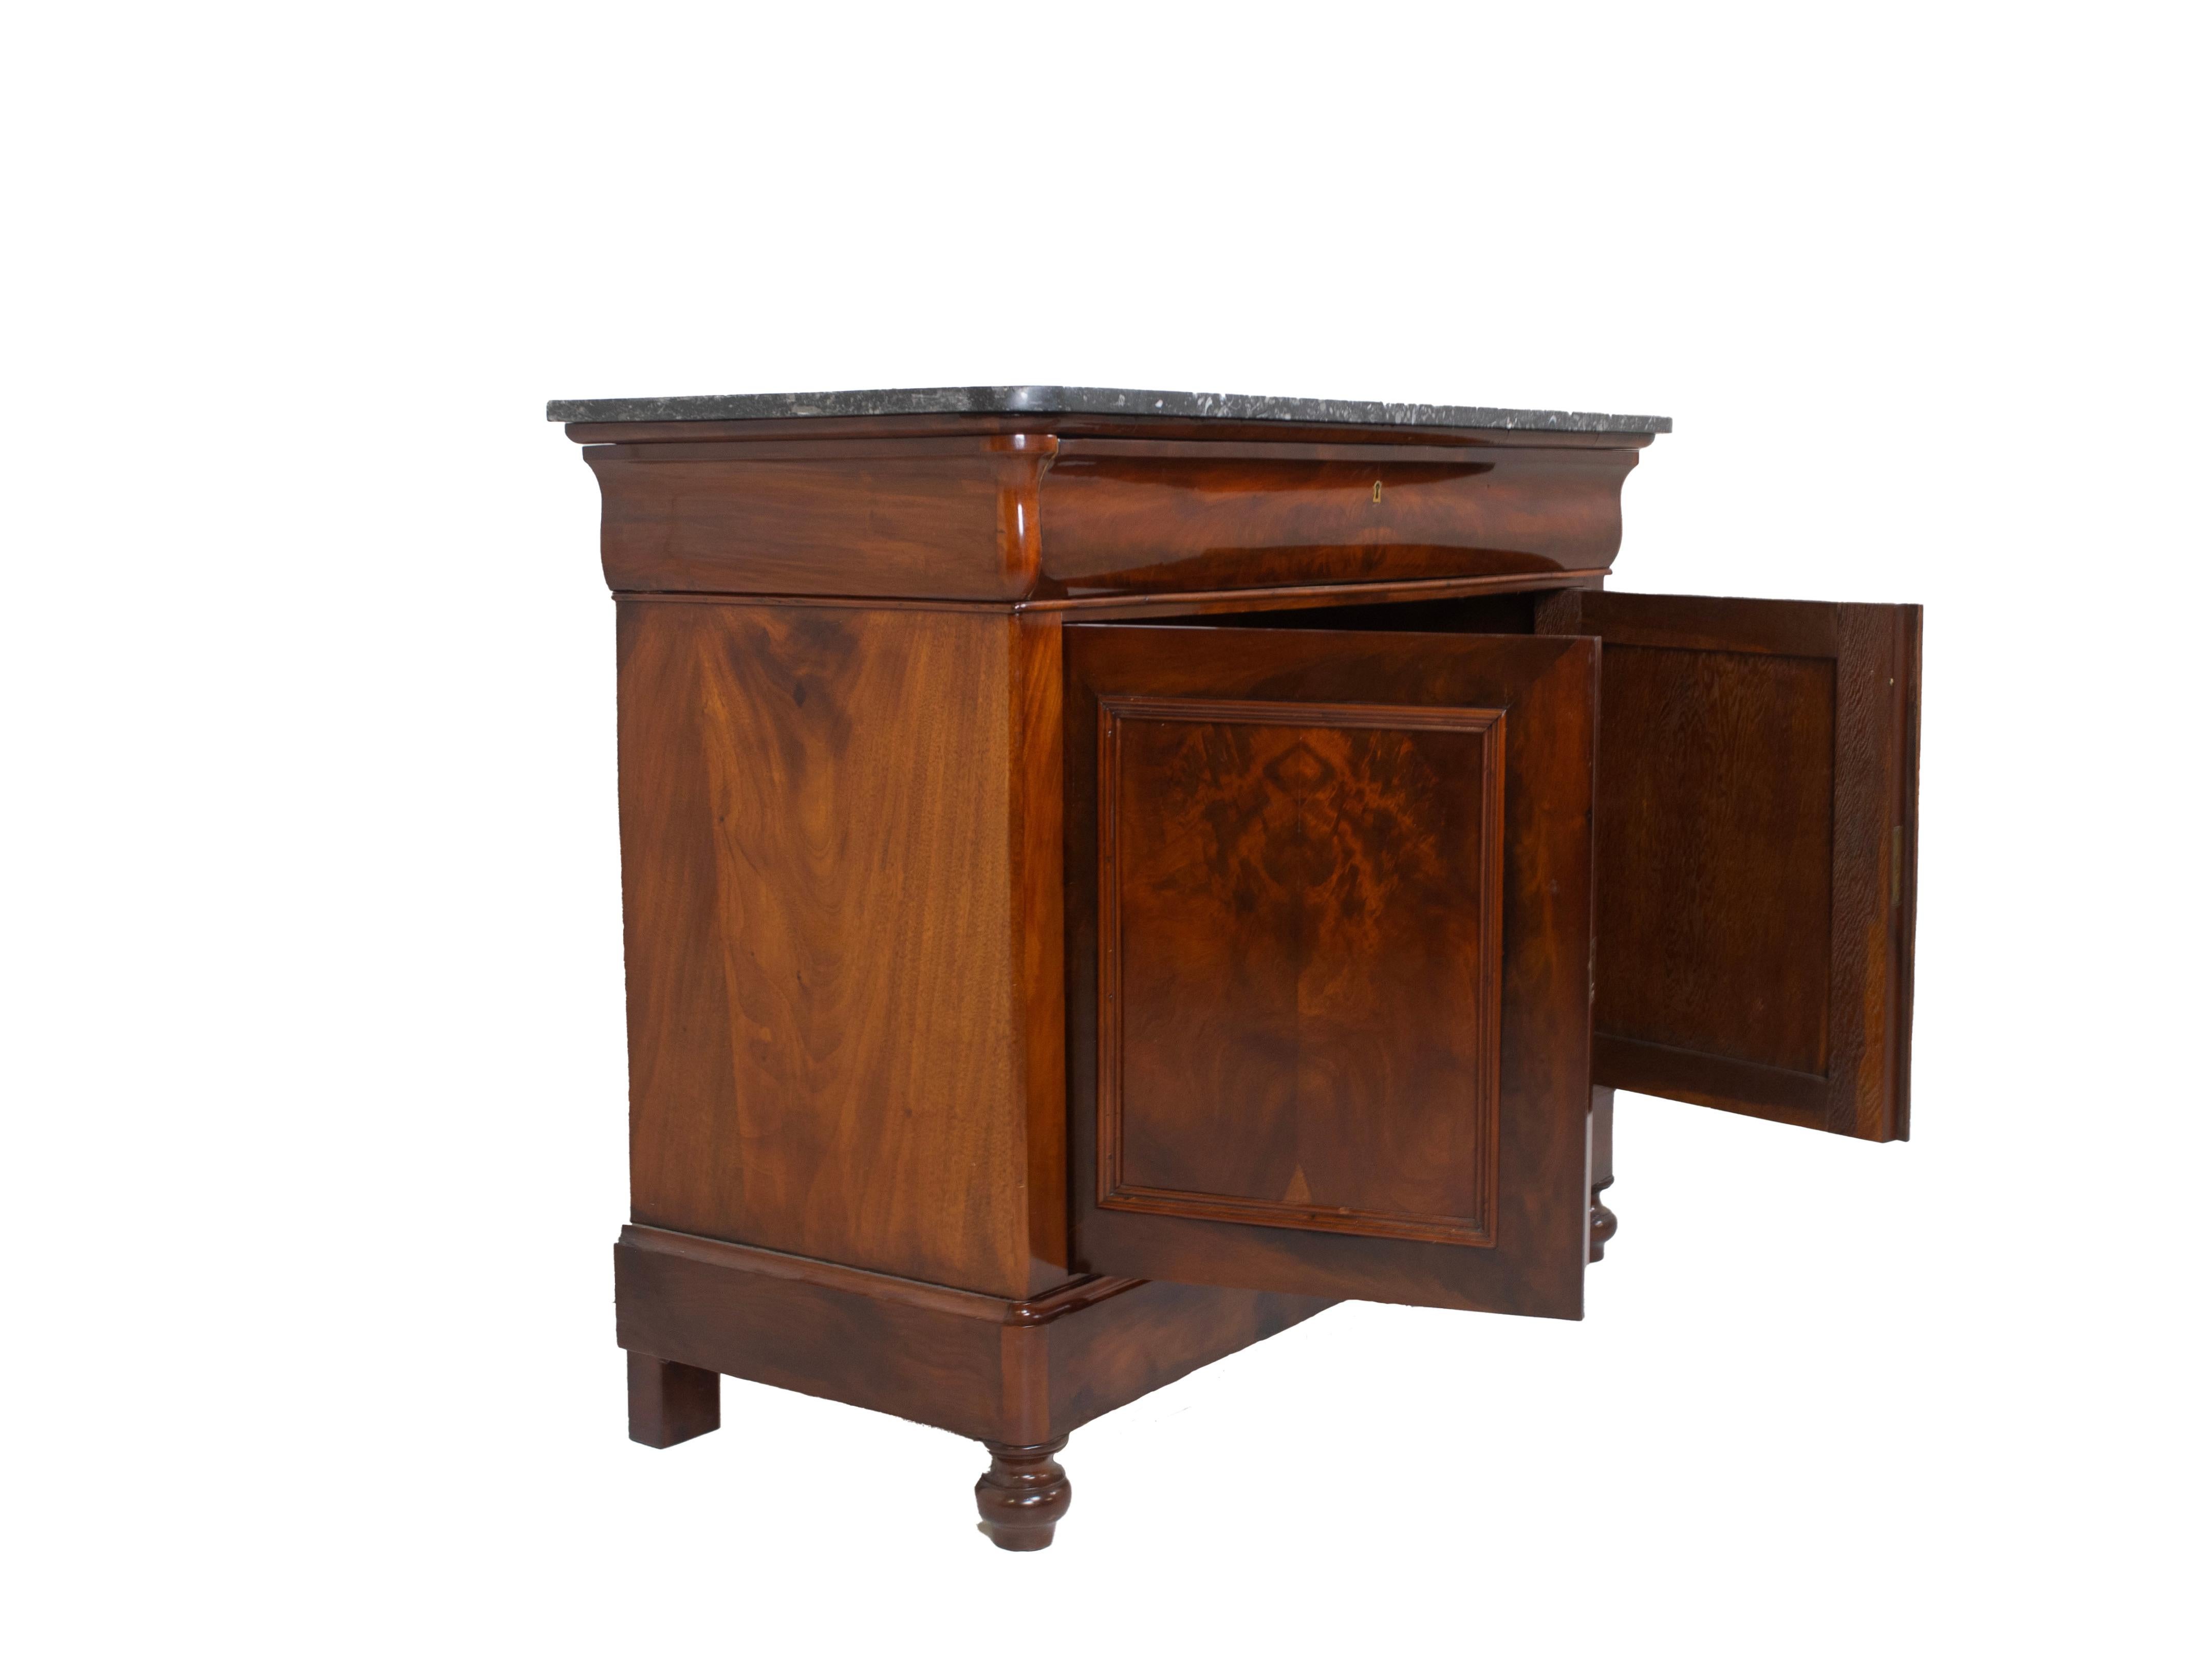 Dutch Early Biedermeier Cabinet in Mahogany with Marble Top, Mid 19th Century 2